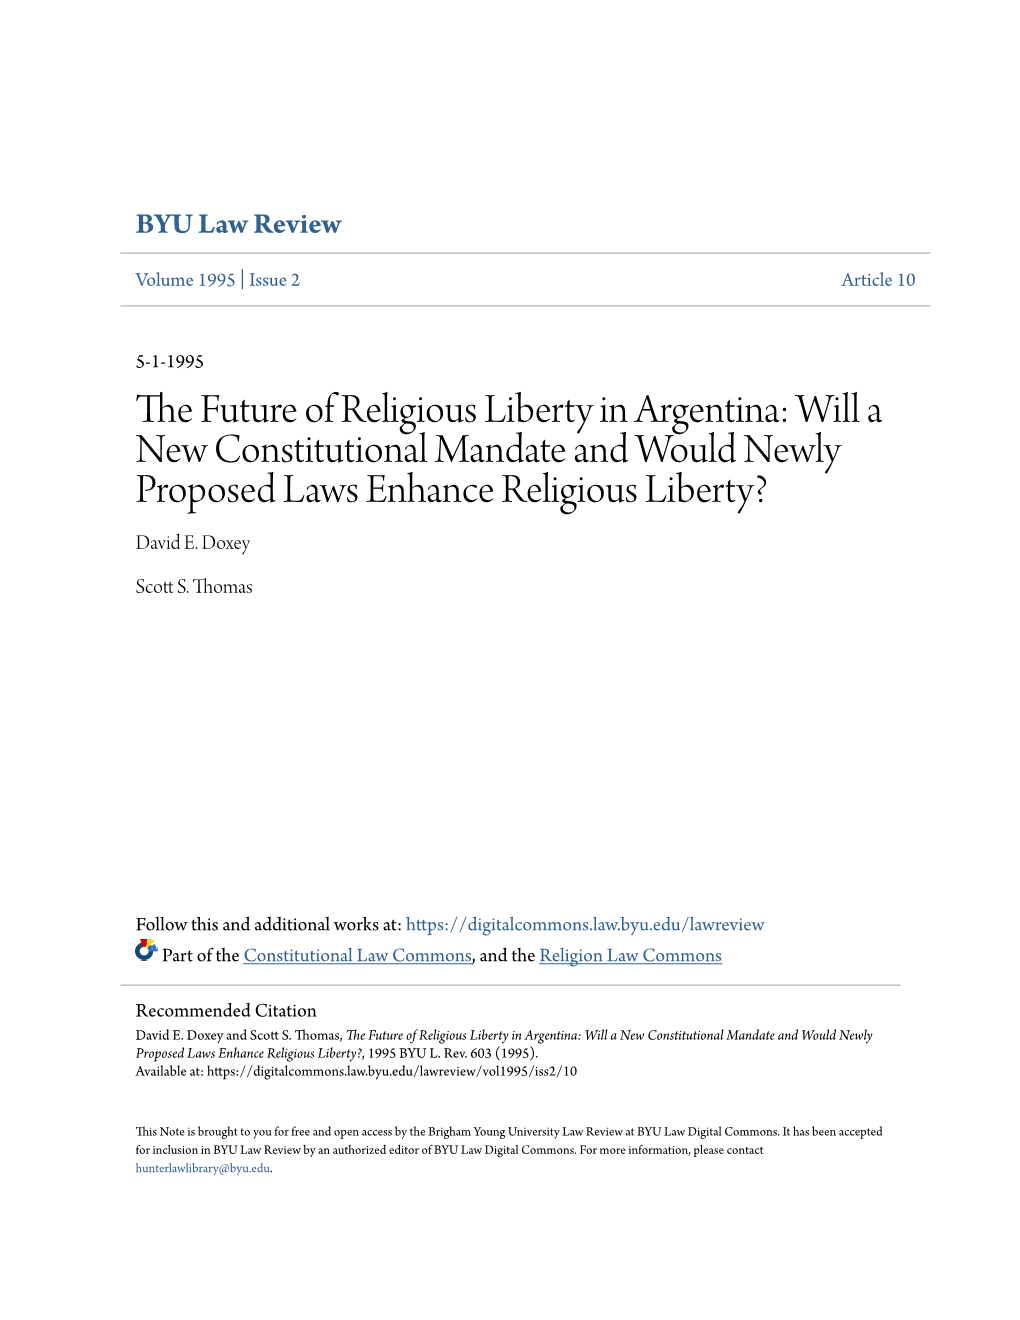 The Future of Religious Liberty in Argentina: Will a New Constitutional Mandate and Would Newly Proposed Laws Enhance Religious Liberty?, 1995 BYU L